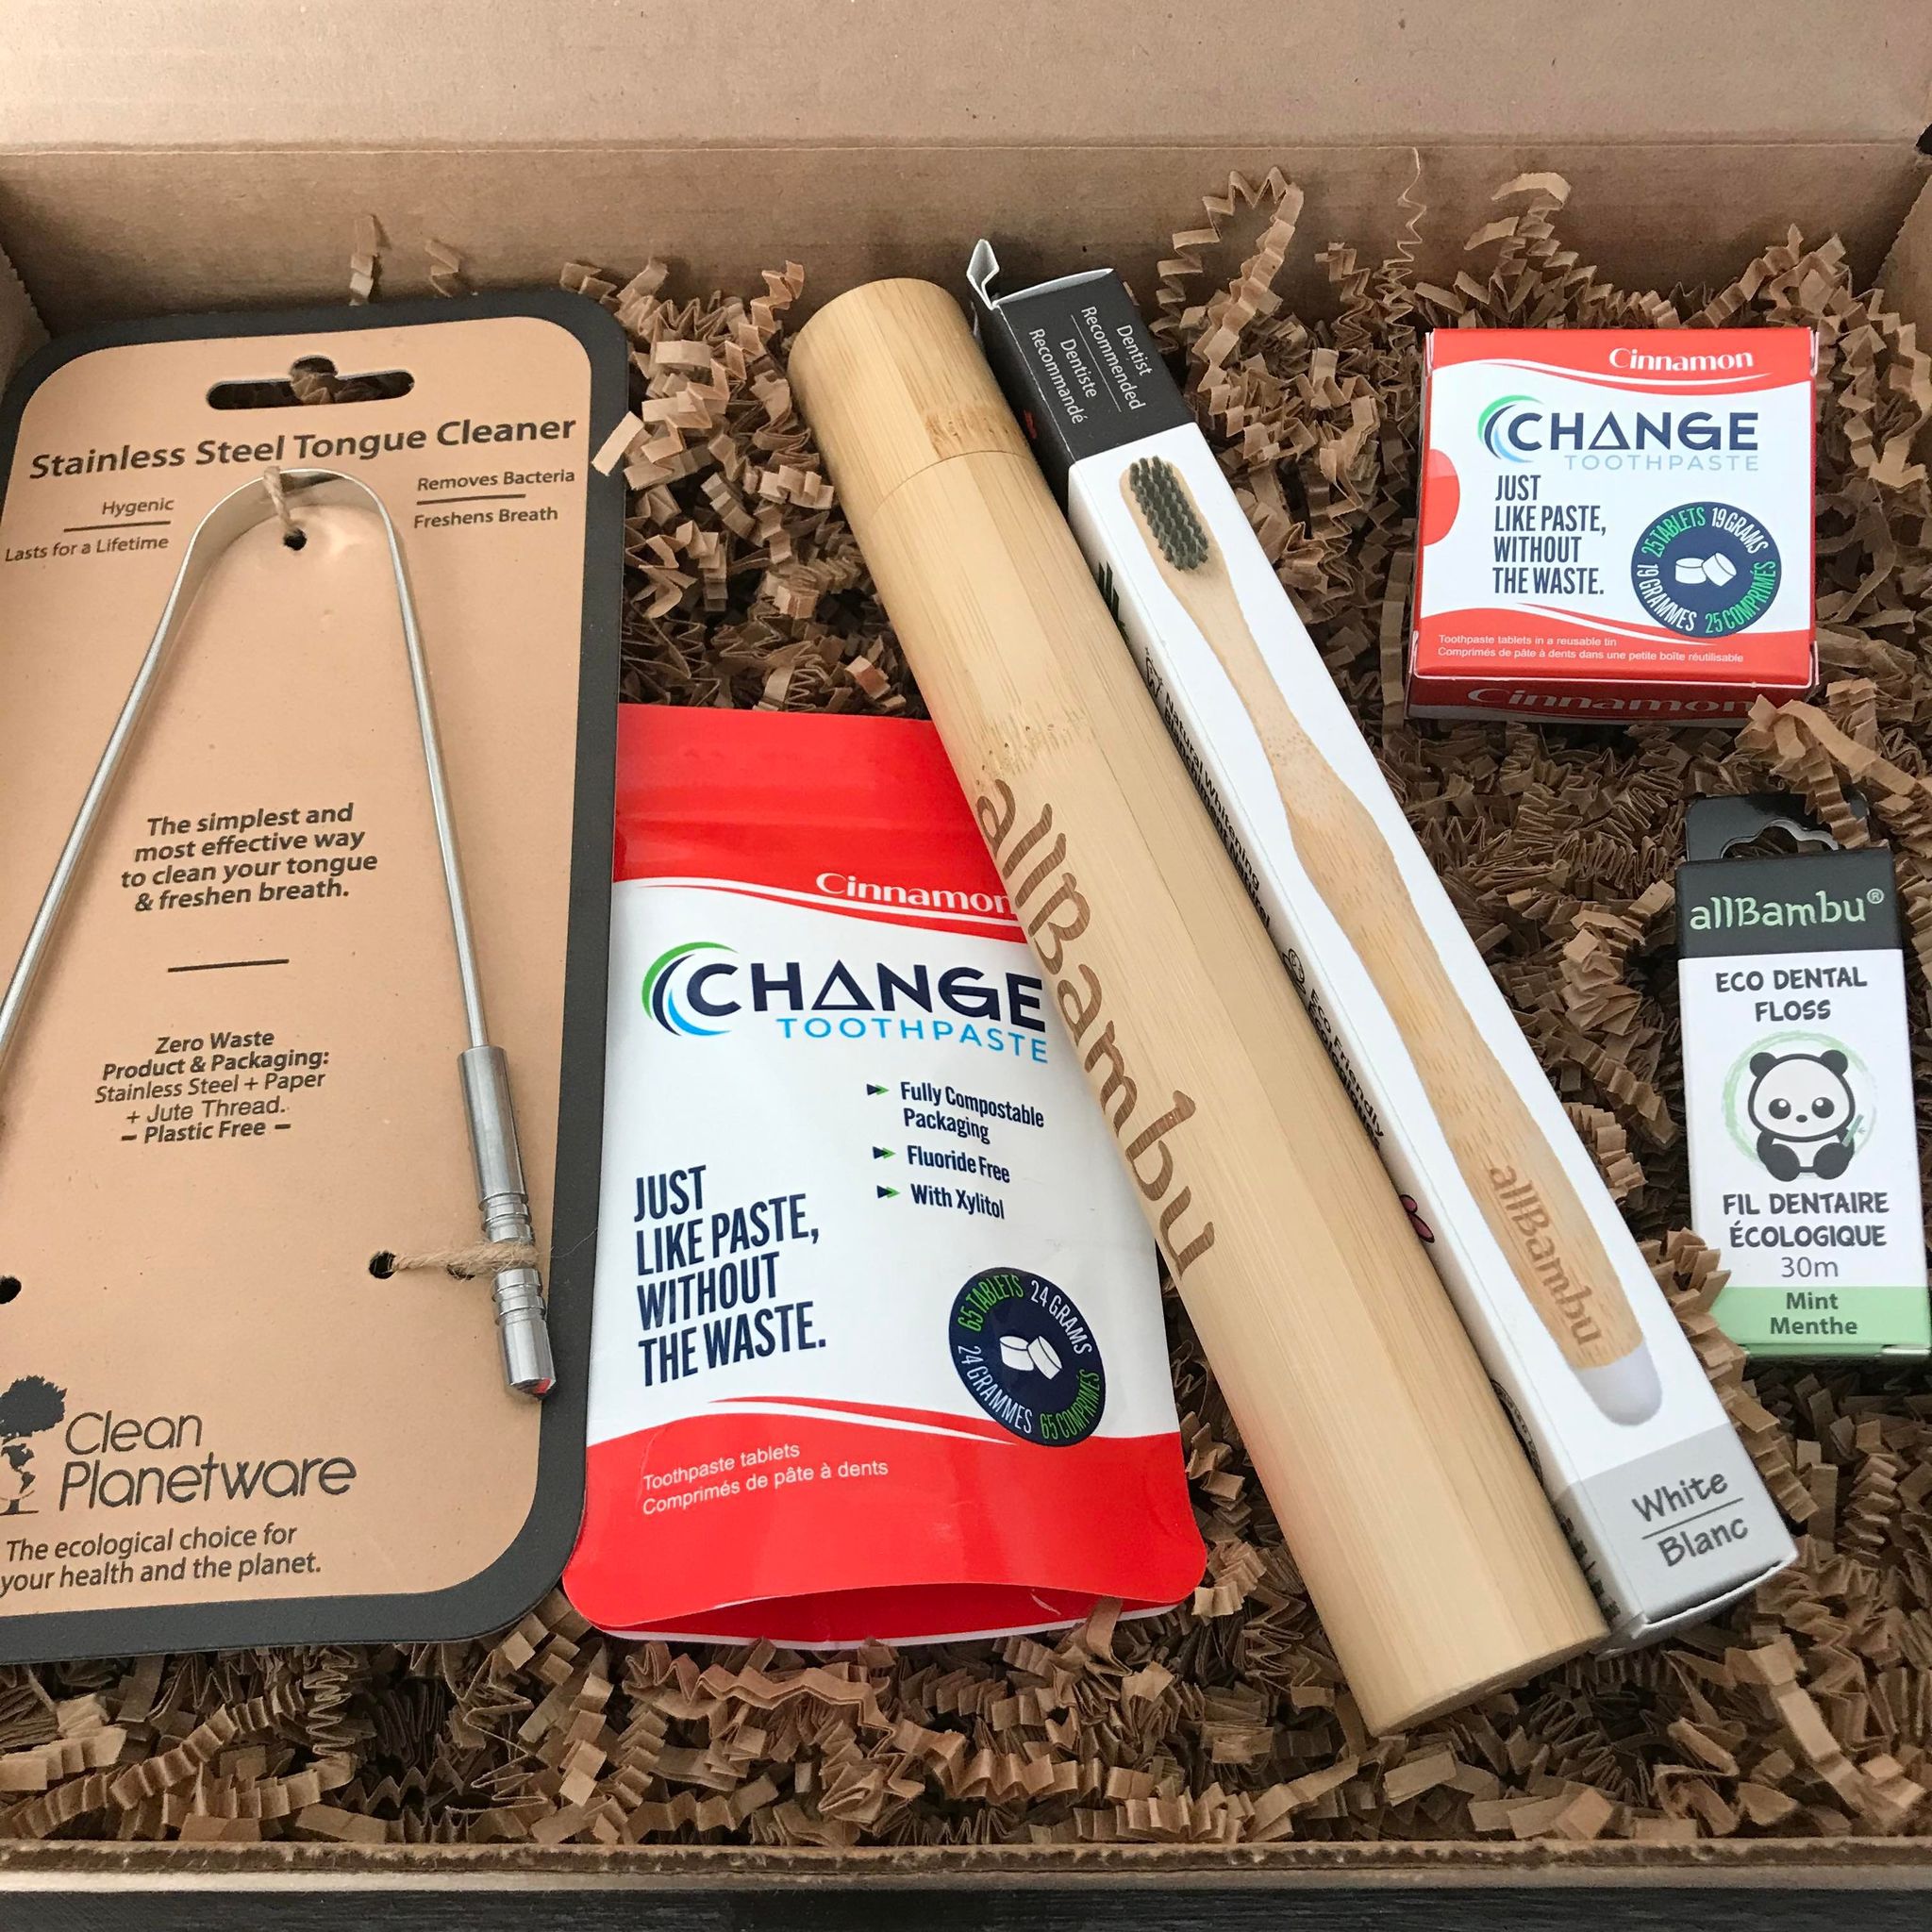 plastic free dental care kit in a gift box that includes a stainless steel tongue cleaner, cinnamon change toothpaste travel tin and one month supply, a bamboo toothbrush and carrying case and eco dental floss in a glass tube